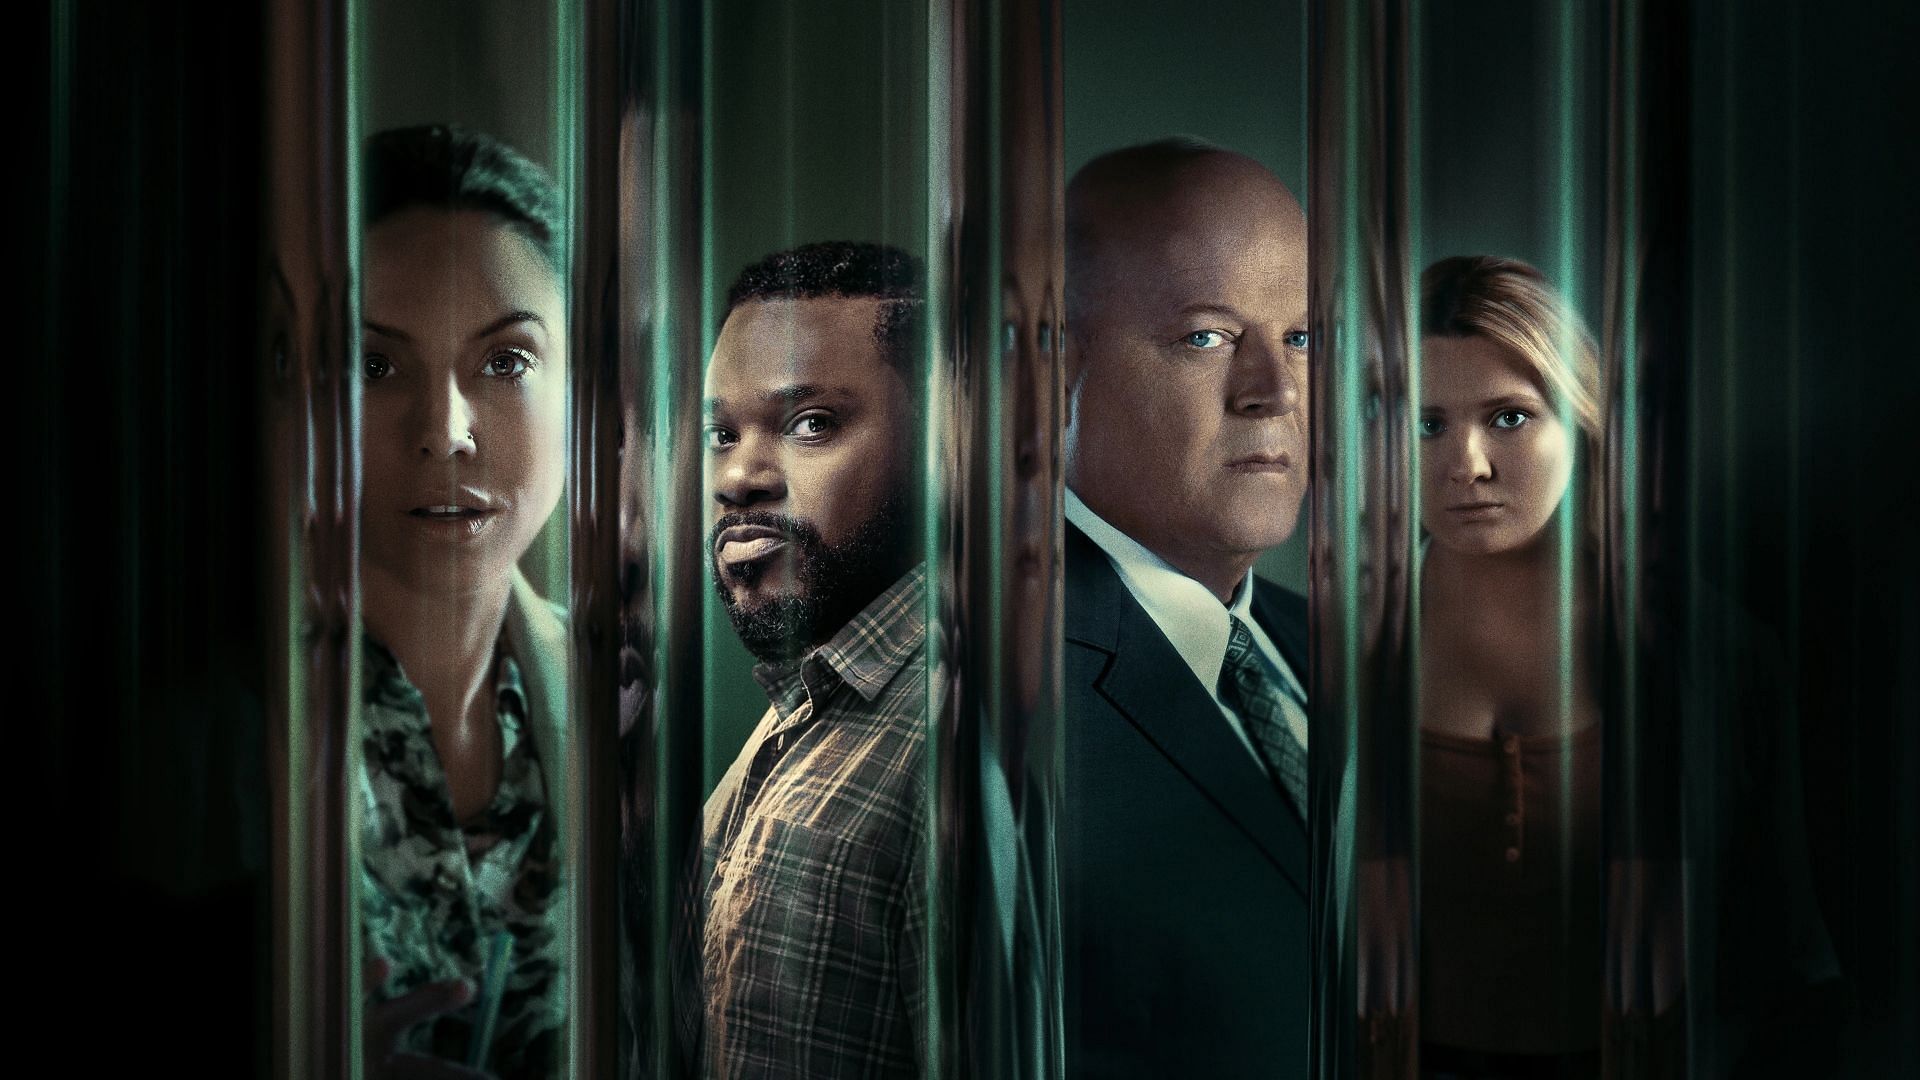 Accused Season 1 release date, air time, plot, and more